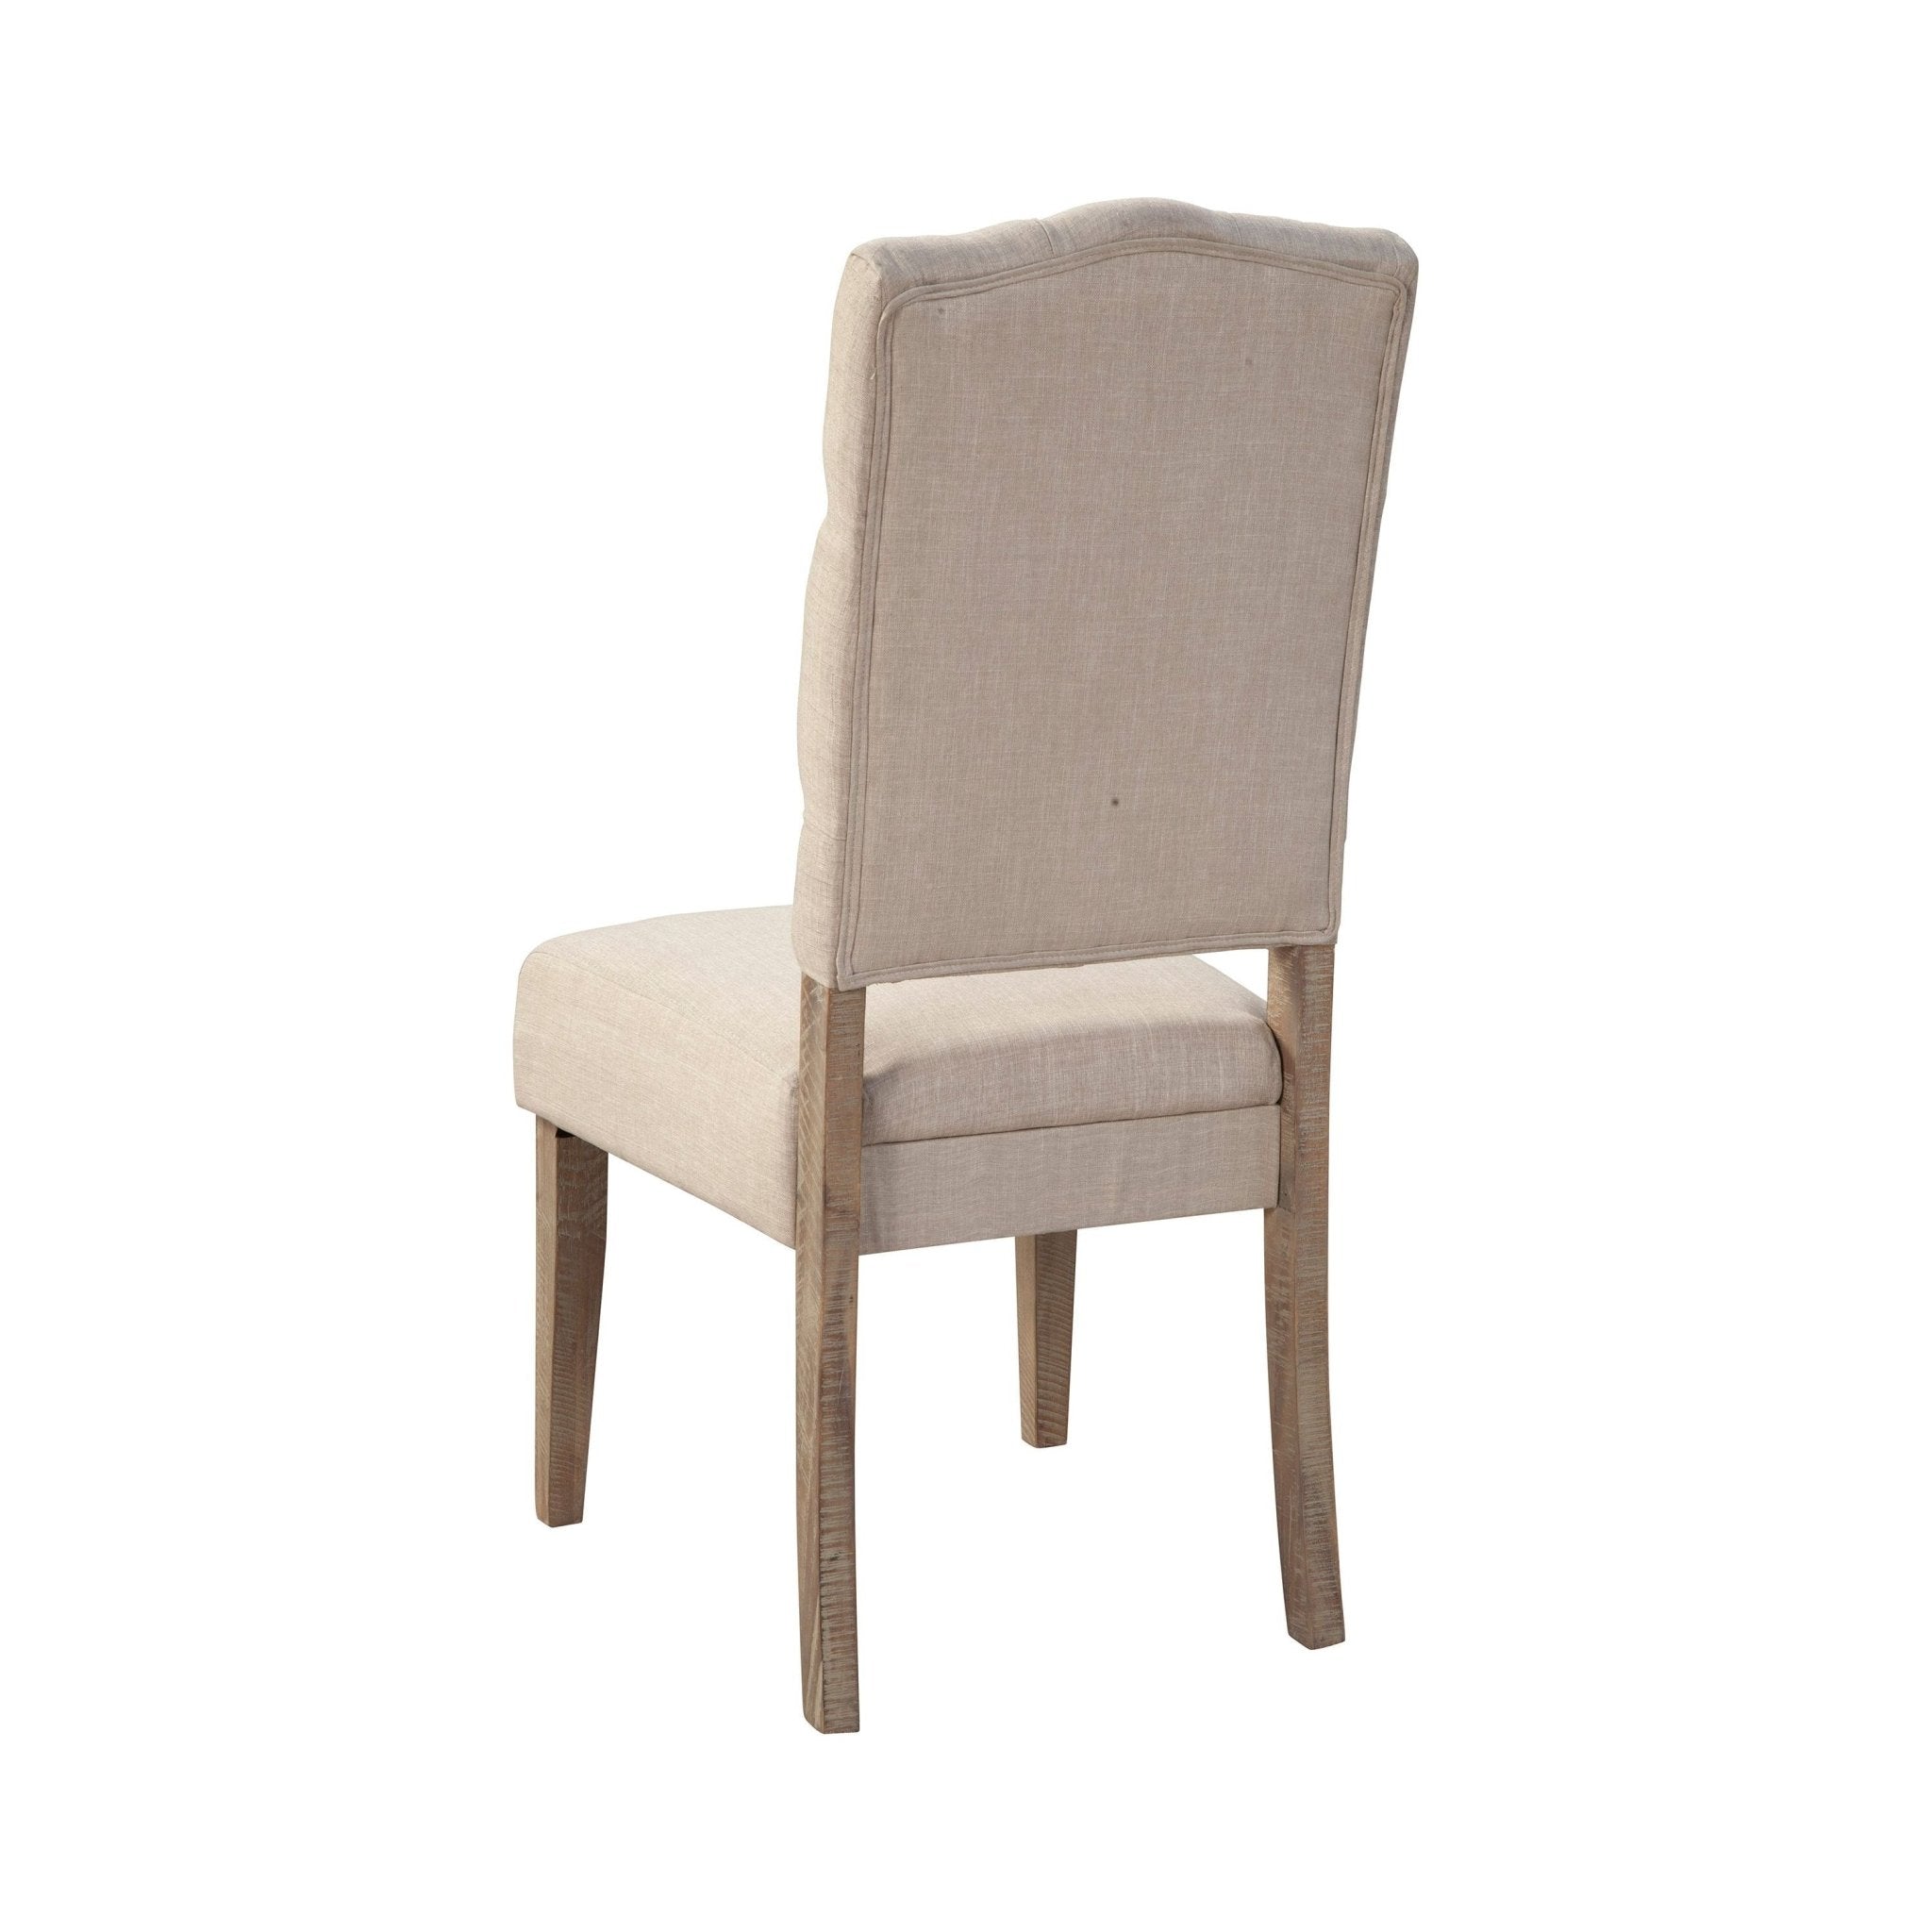 Newberry Side Chairs, Weathered Natural